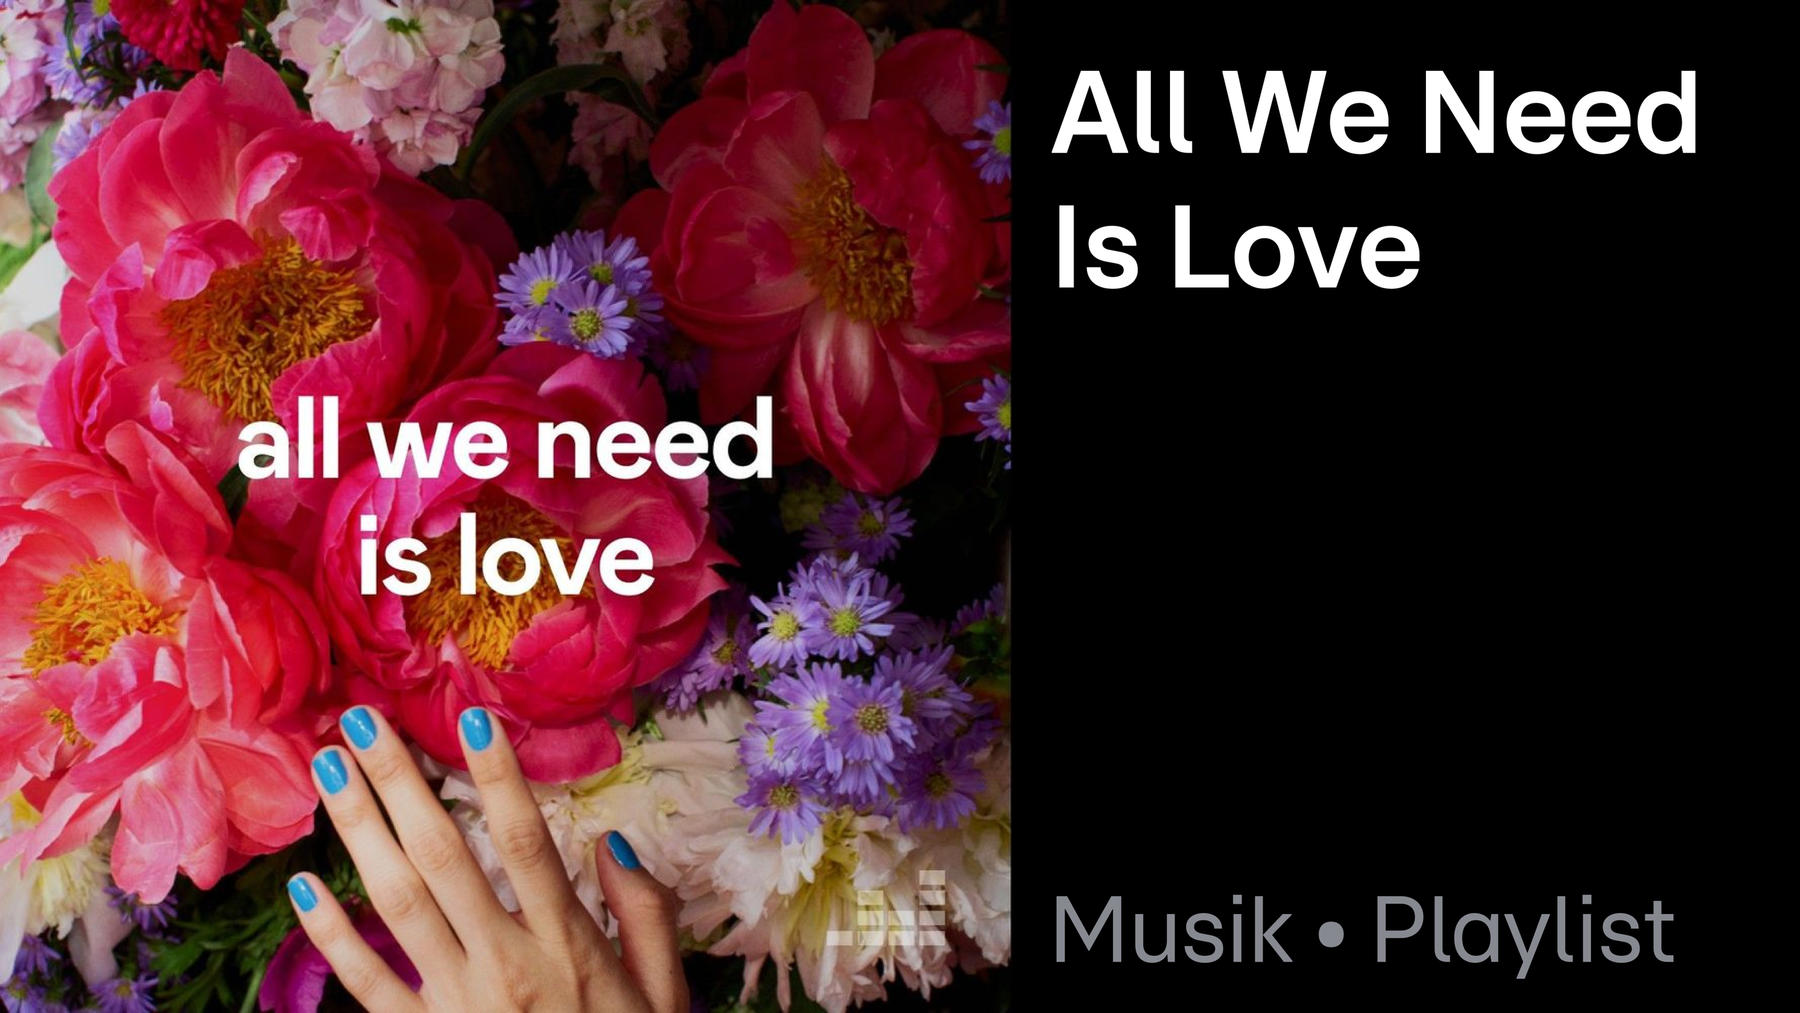 Playlist: All We Need is Love